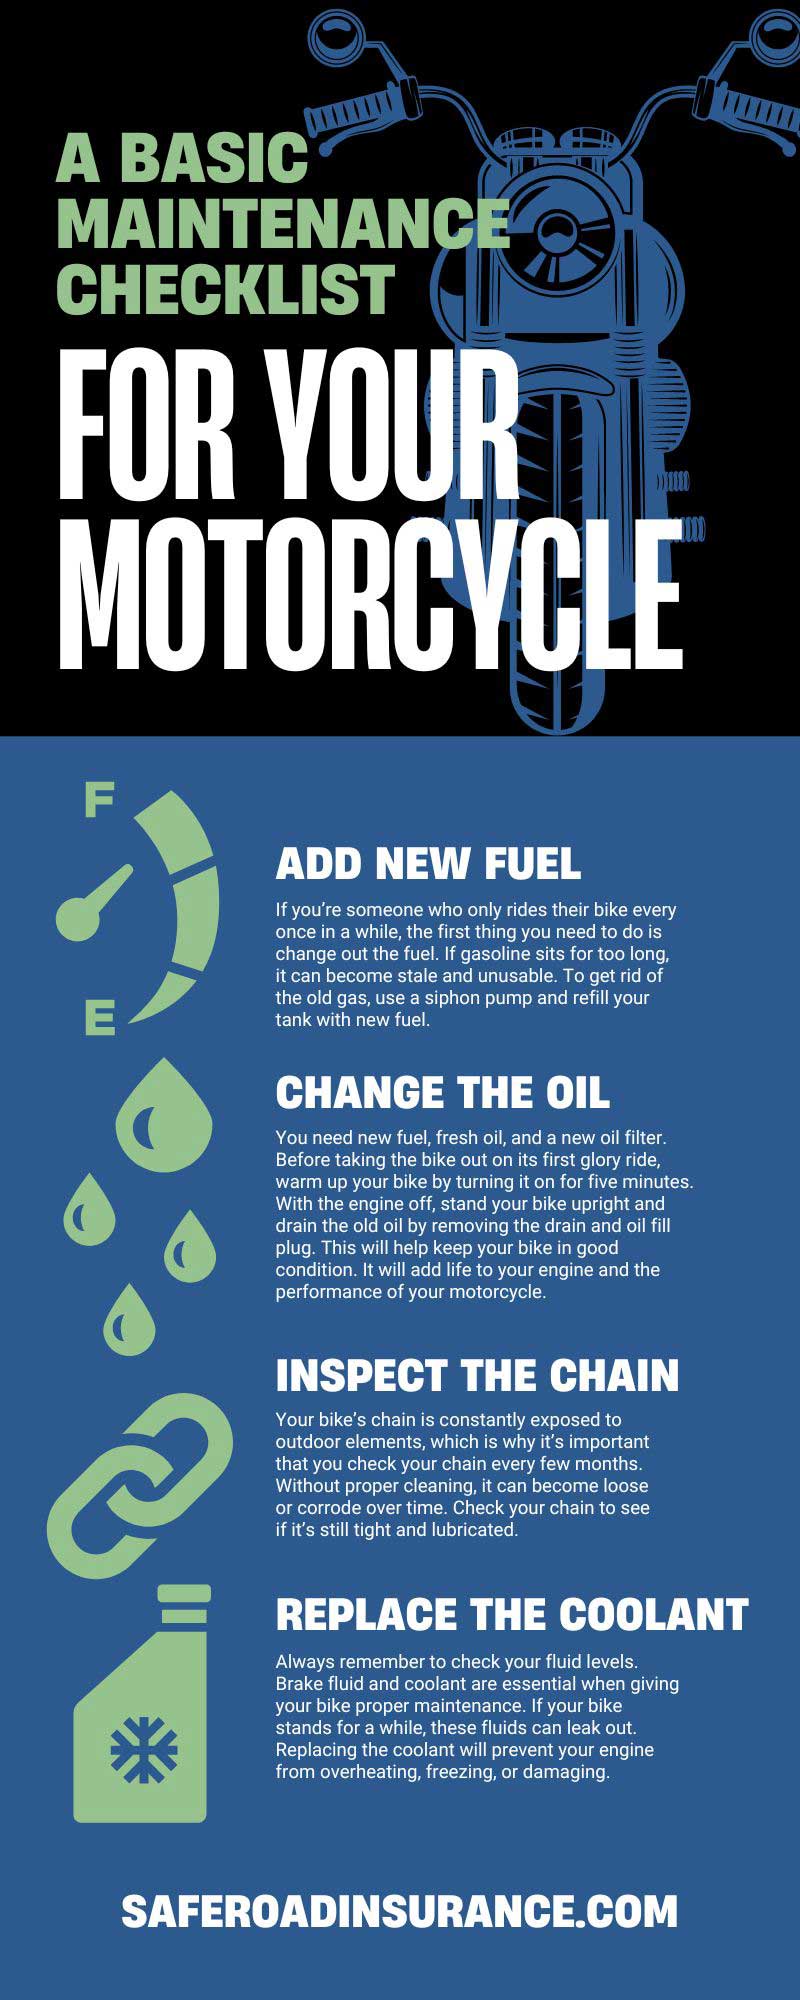 A Basic Maintenance Checklist for Your Motorcycle